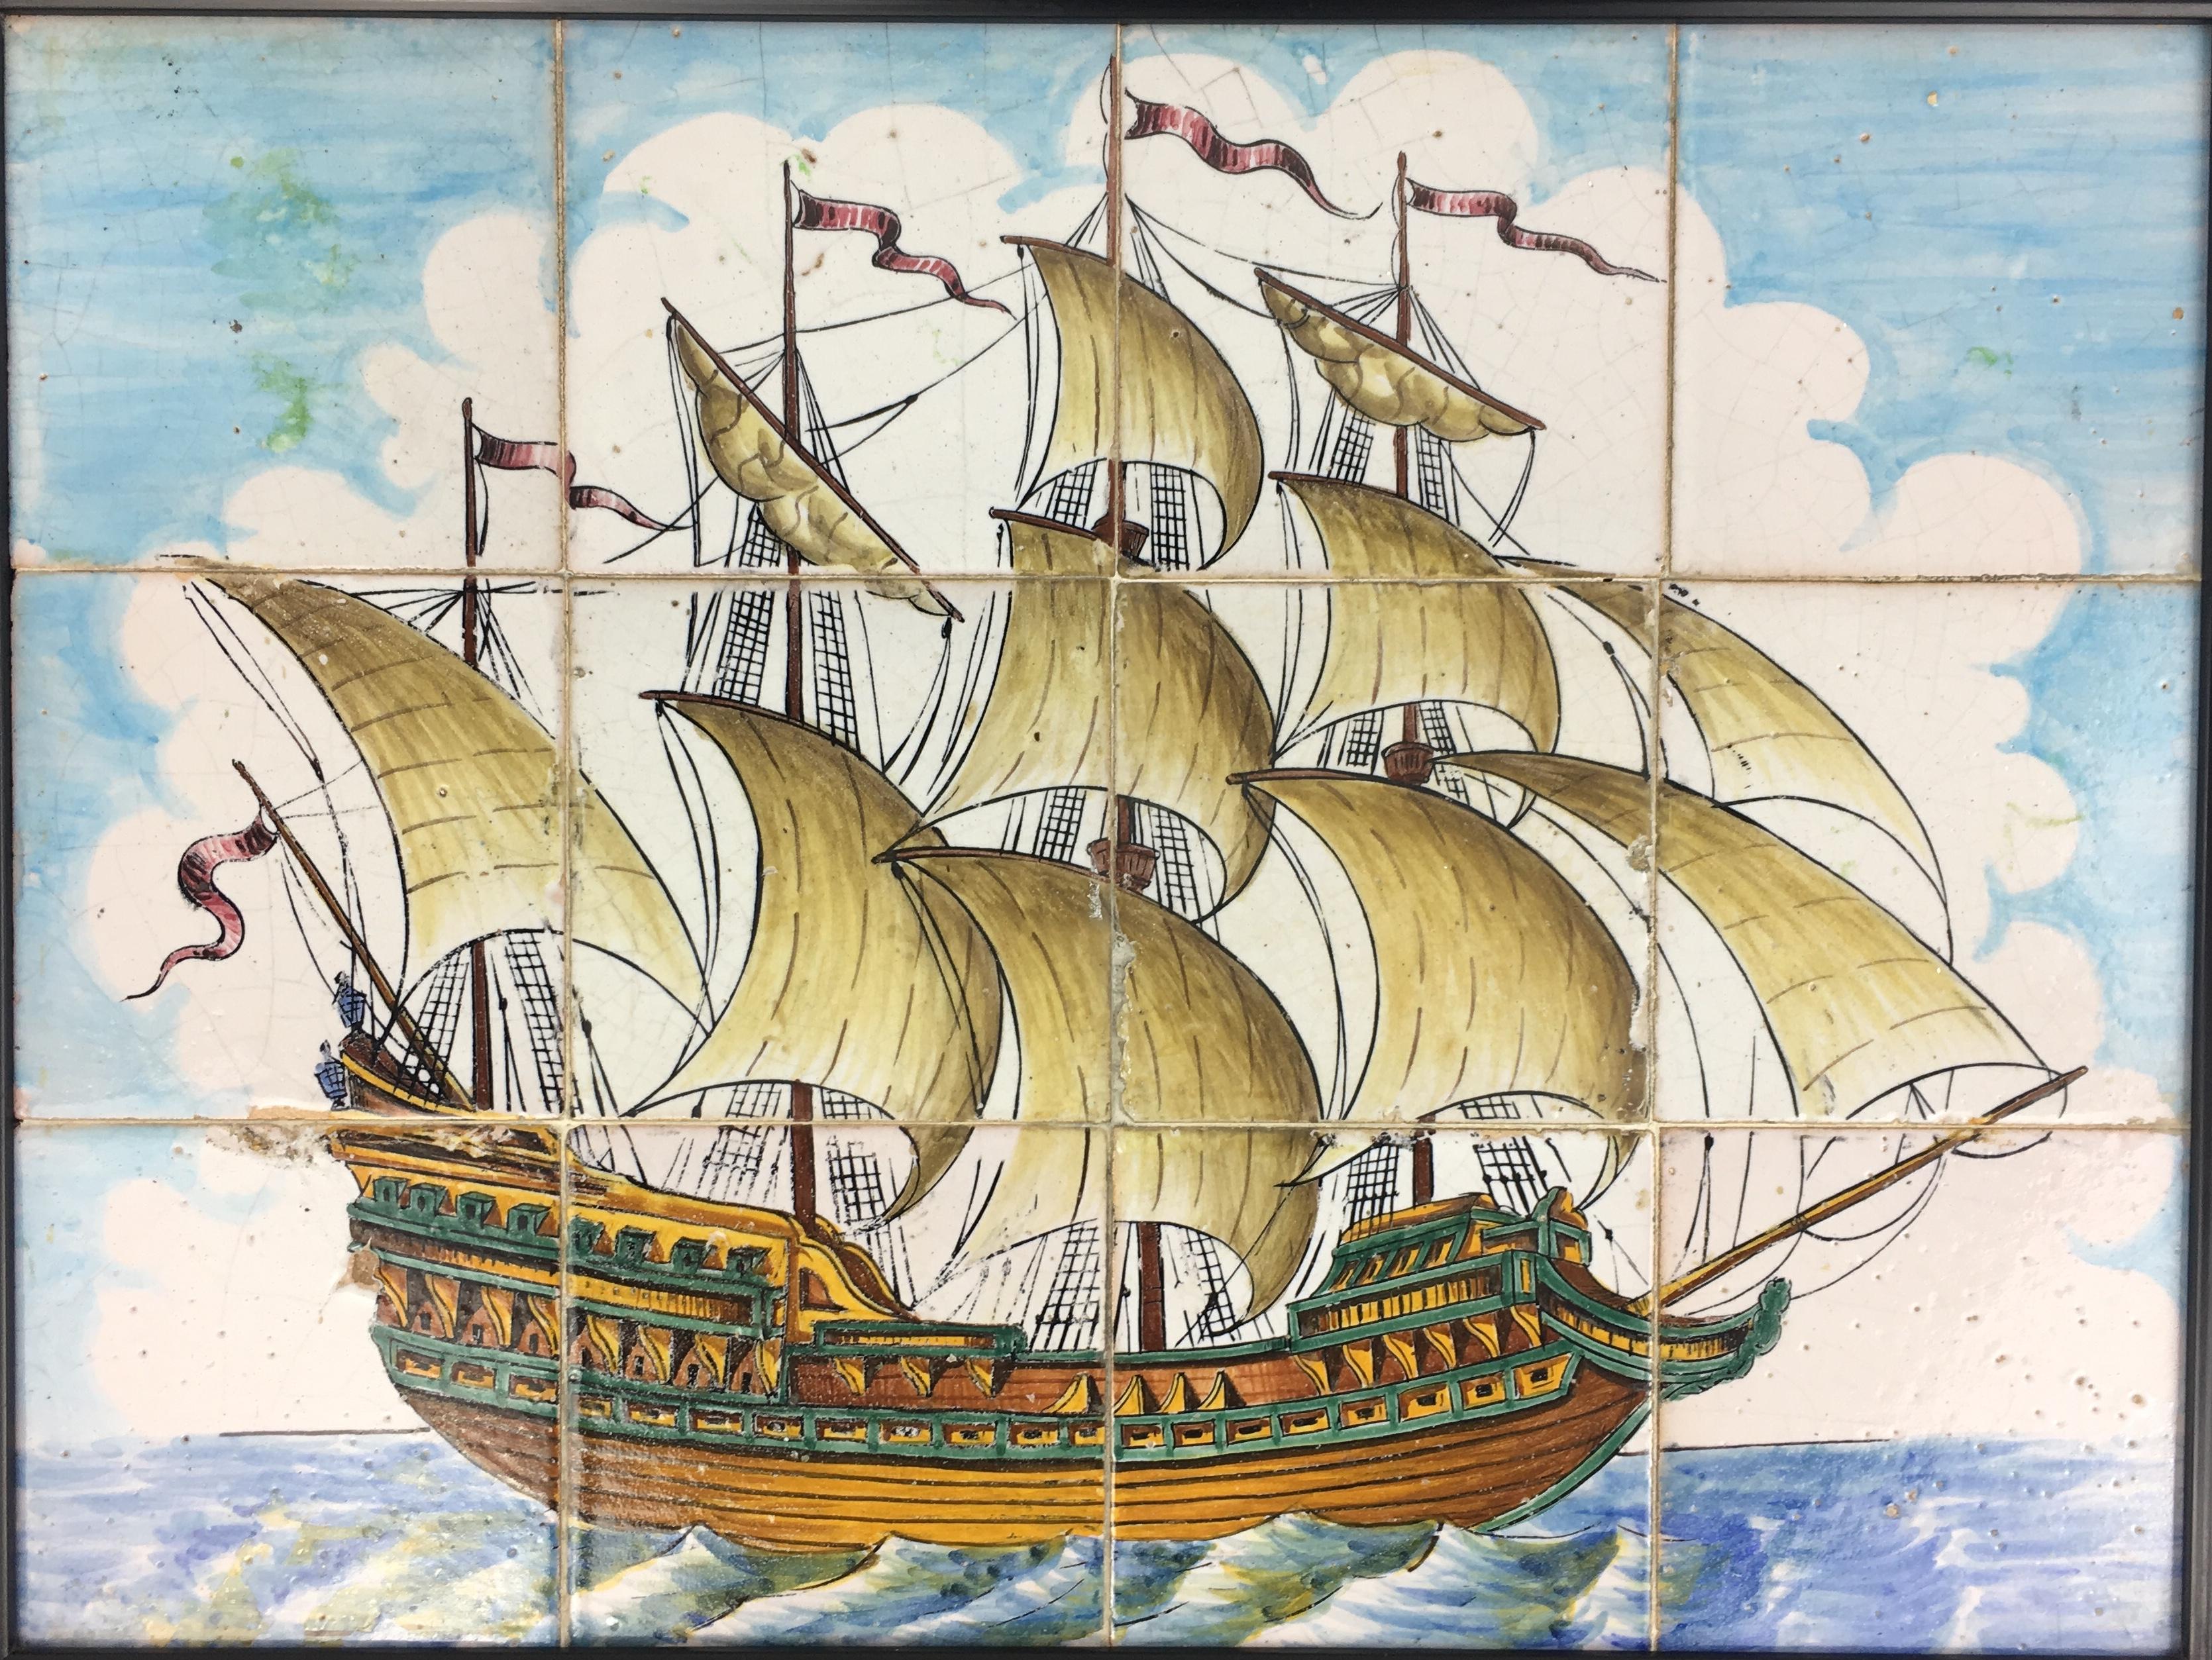 18th century Portuguese Azulejos mural tiles decorative wall hanging depicting a sailboat on the sea, in various shades of blue, beige, and other accentuating colors. Stunning details with eye-catching blue, white, mustard, natural green and yellow